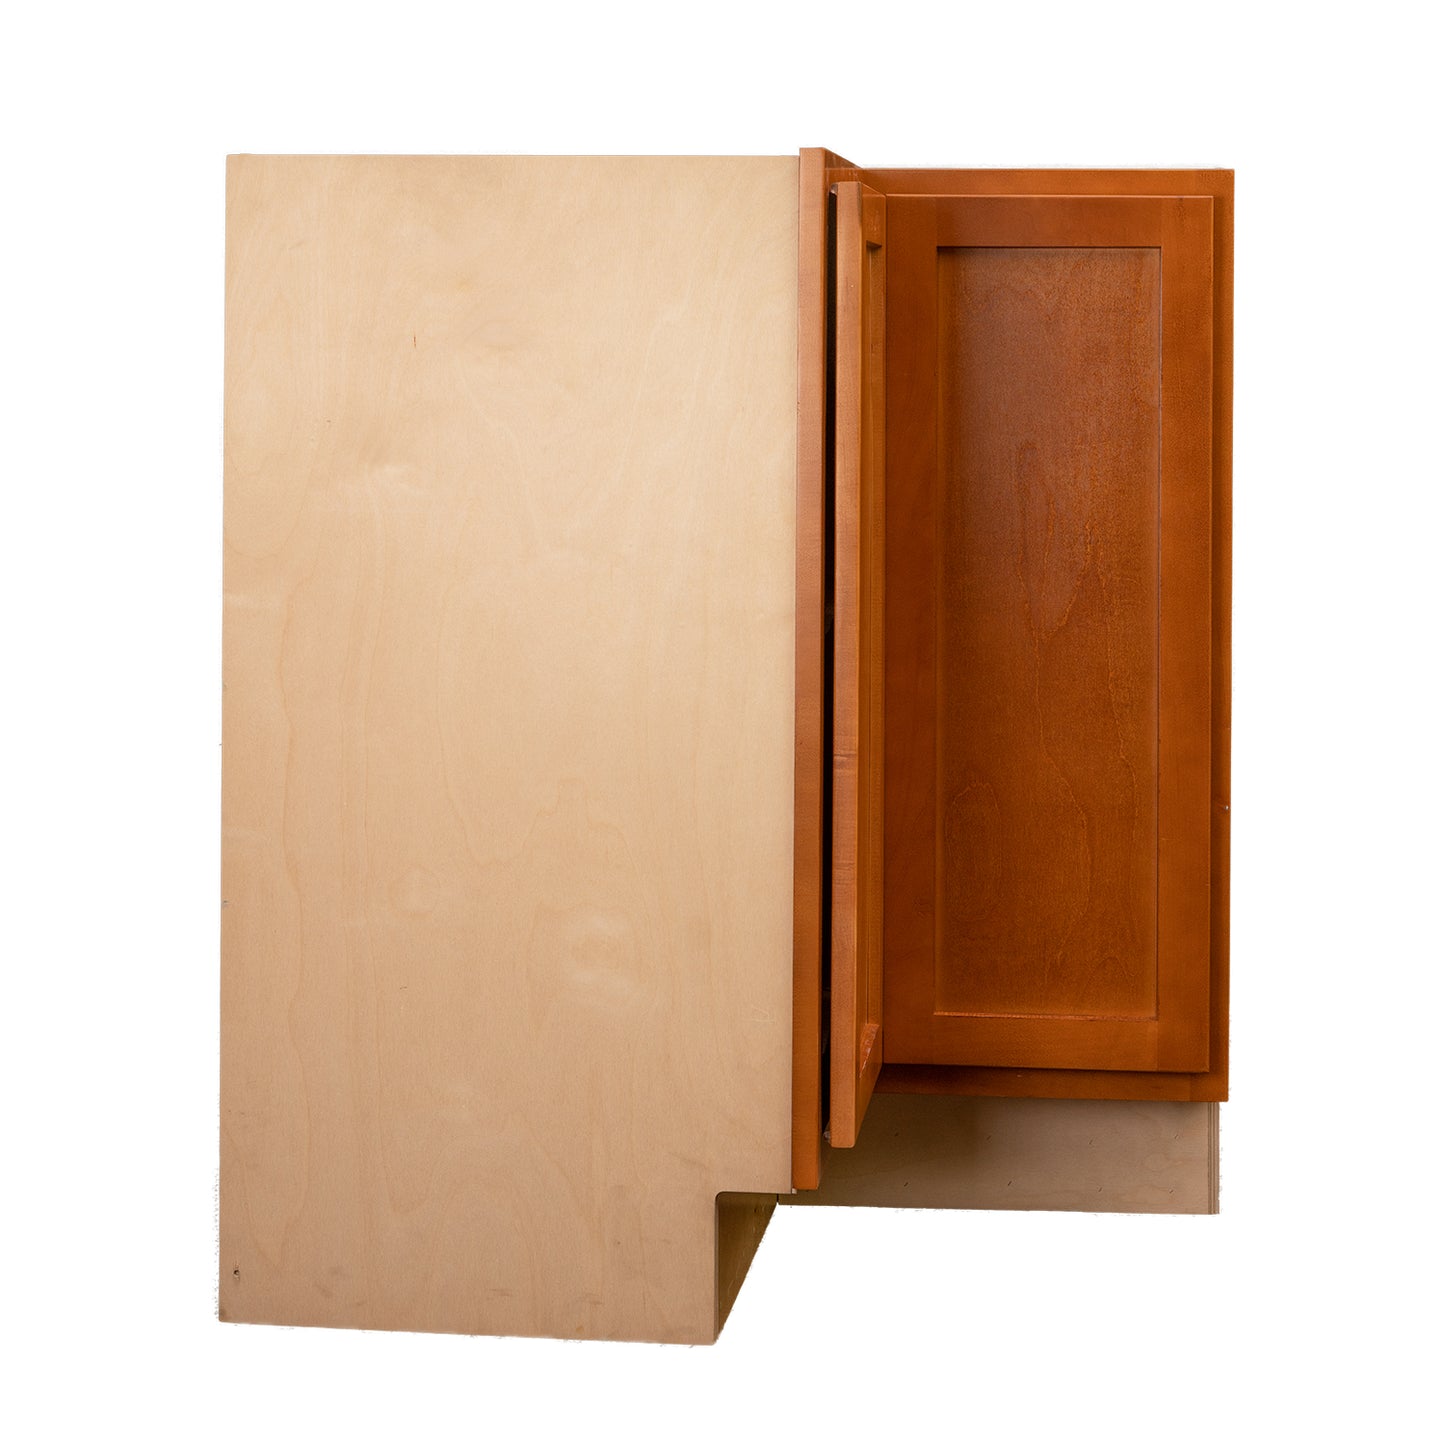 Quicklock RTA (Ready-to-Assemble) Provincial Stain Lazy Susan Cabinet | 18"D x 30" W x 34.5"